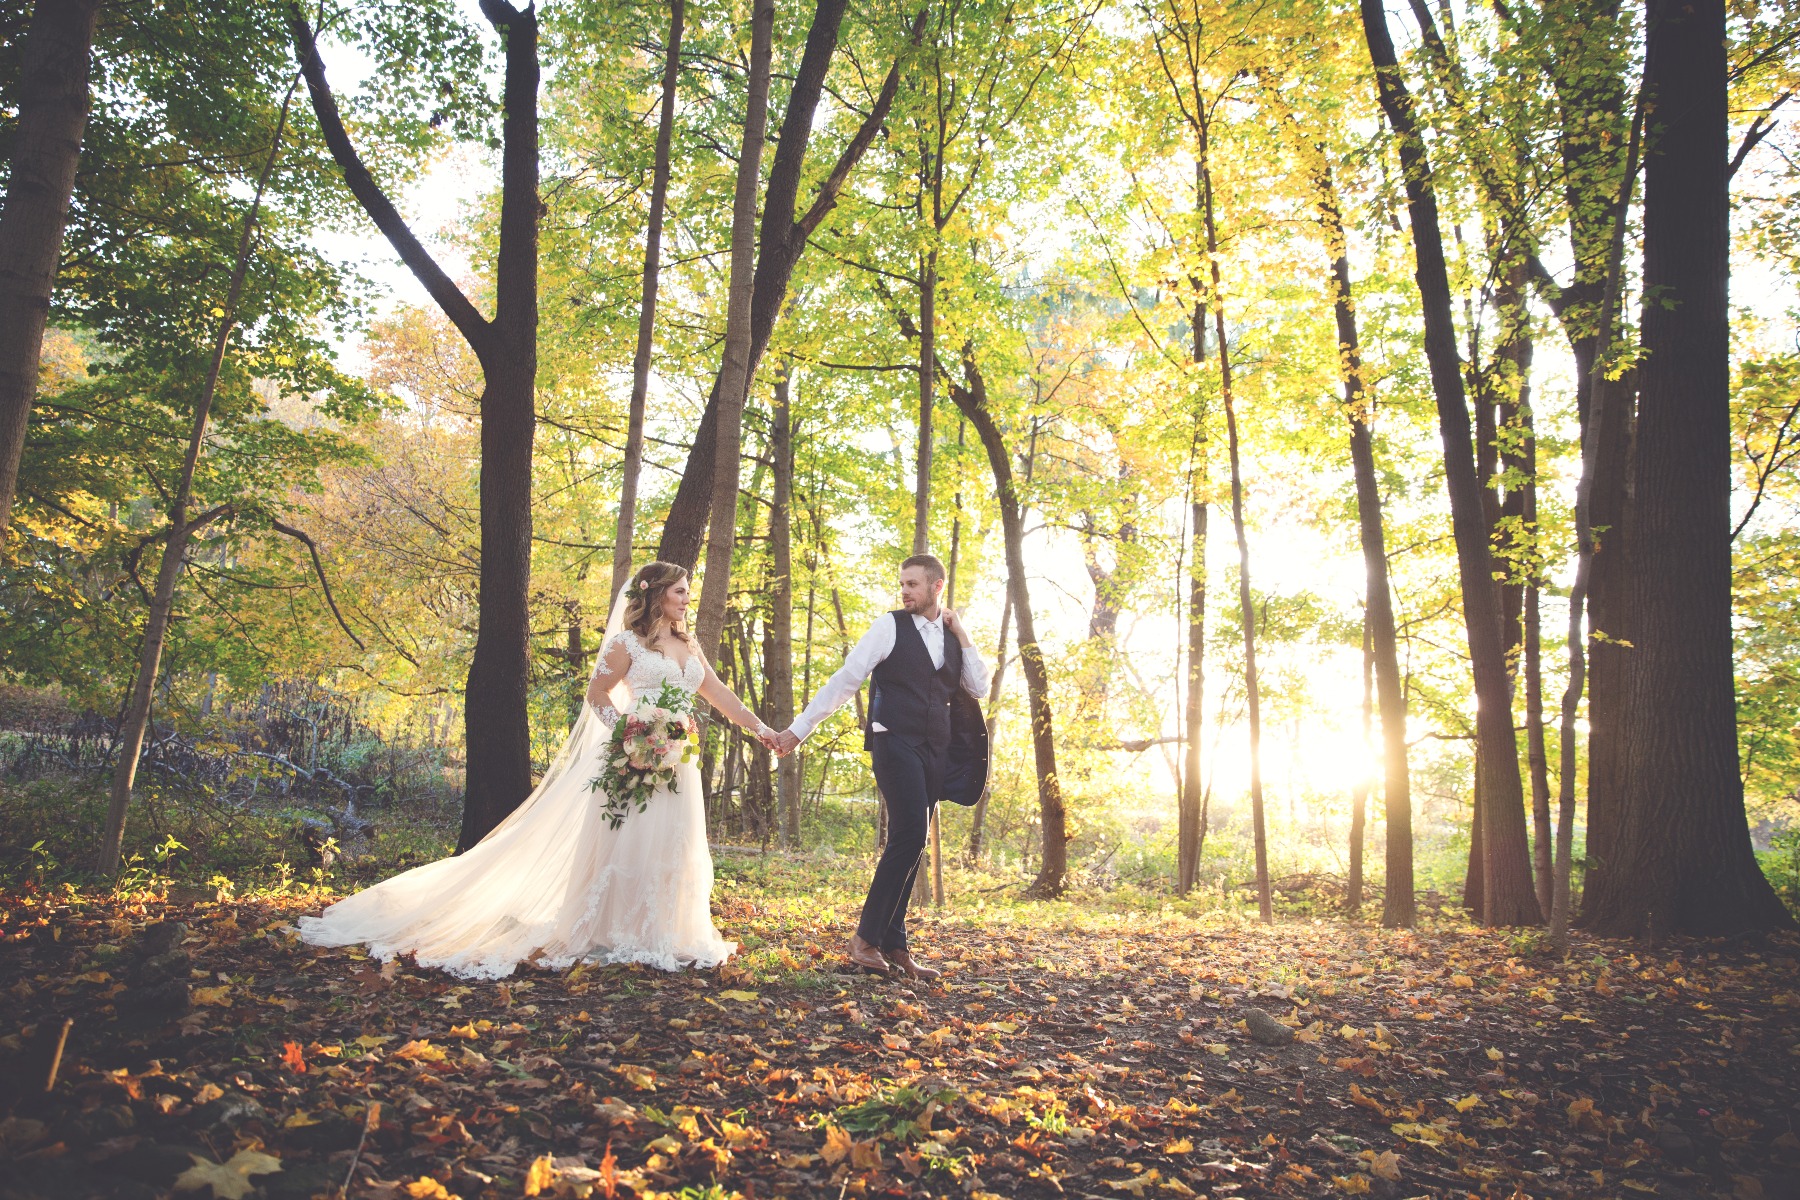 groom leads his bride through a yellow wooded forest